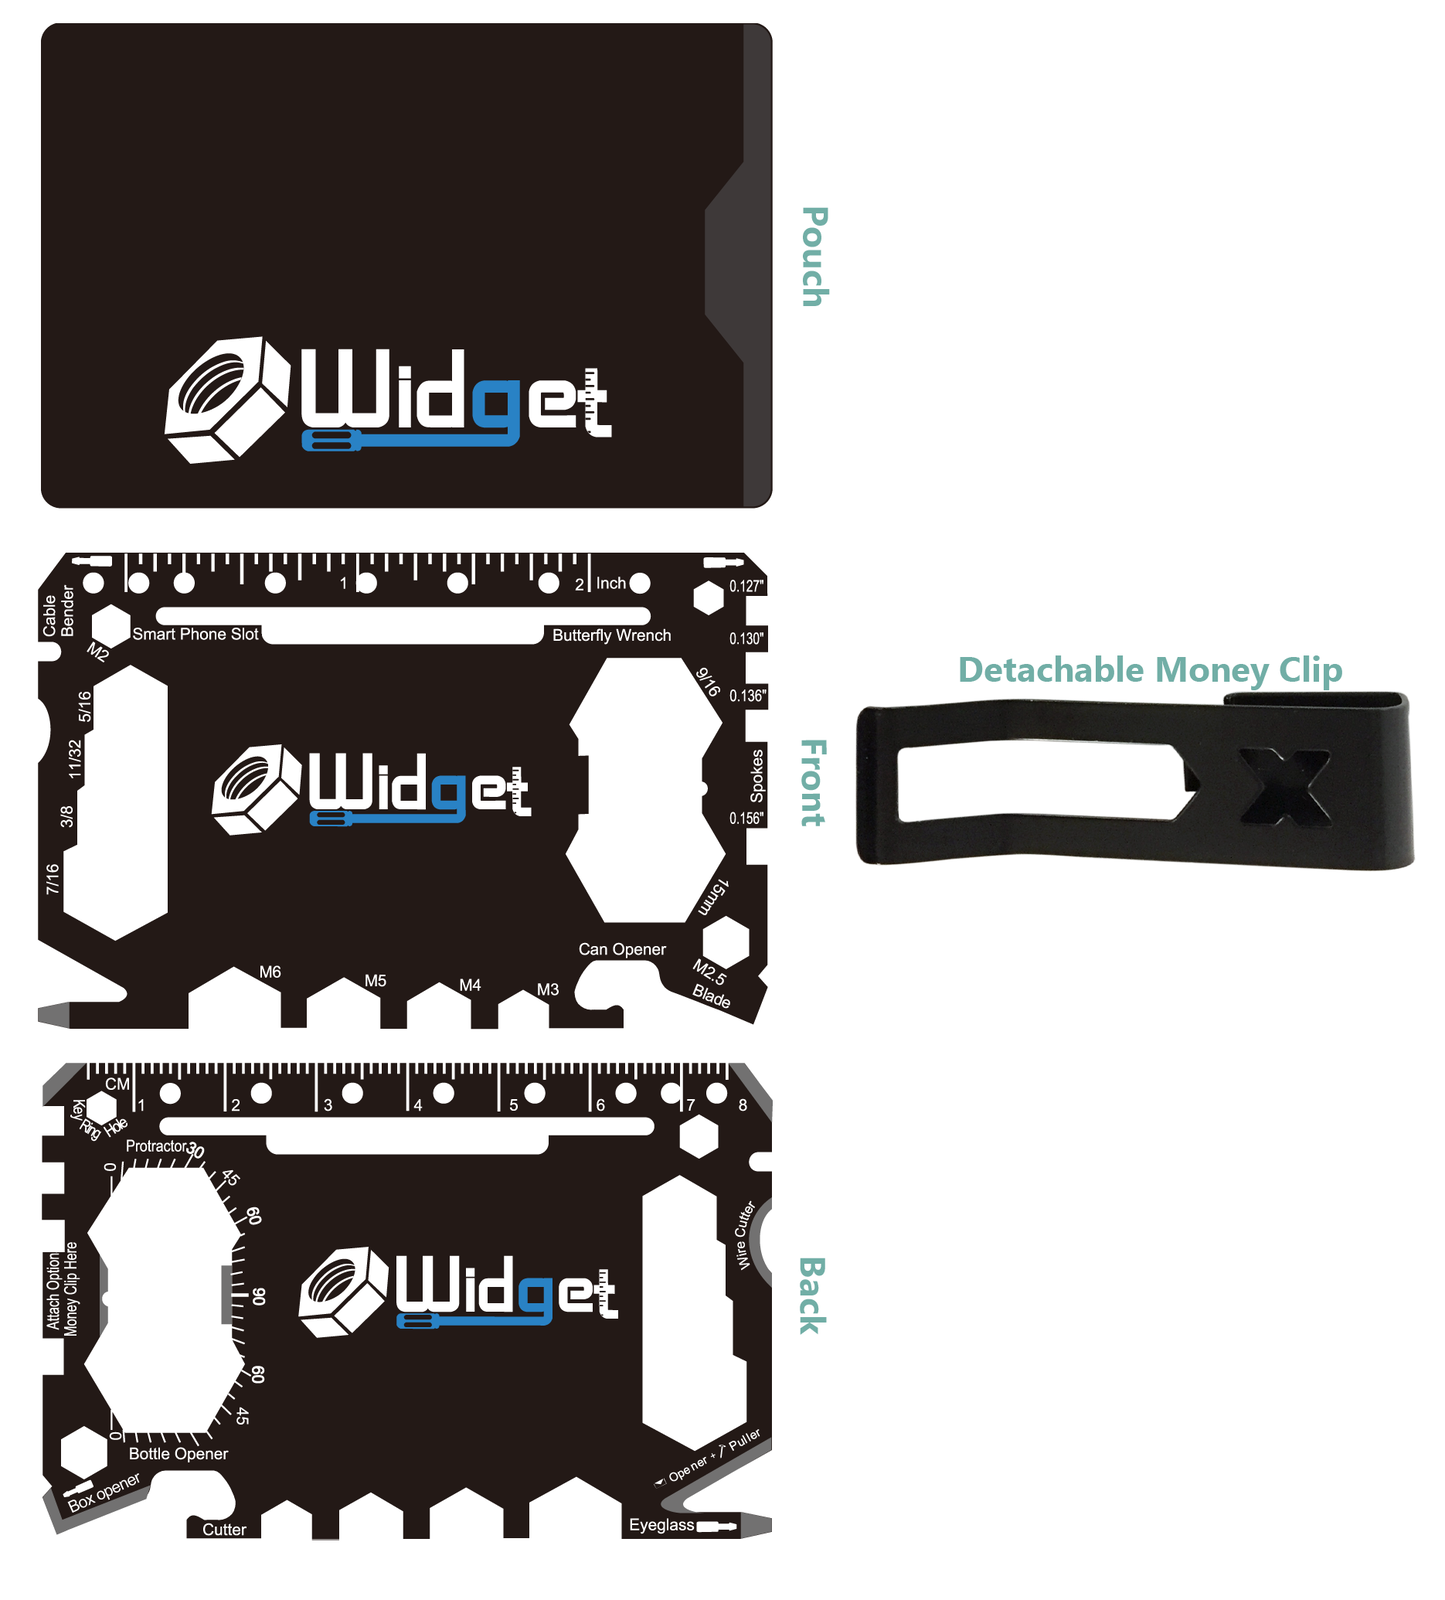 The WIDGET (43-in-1 Credit Card Size Multi-tool)